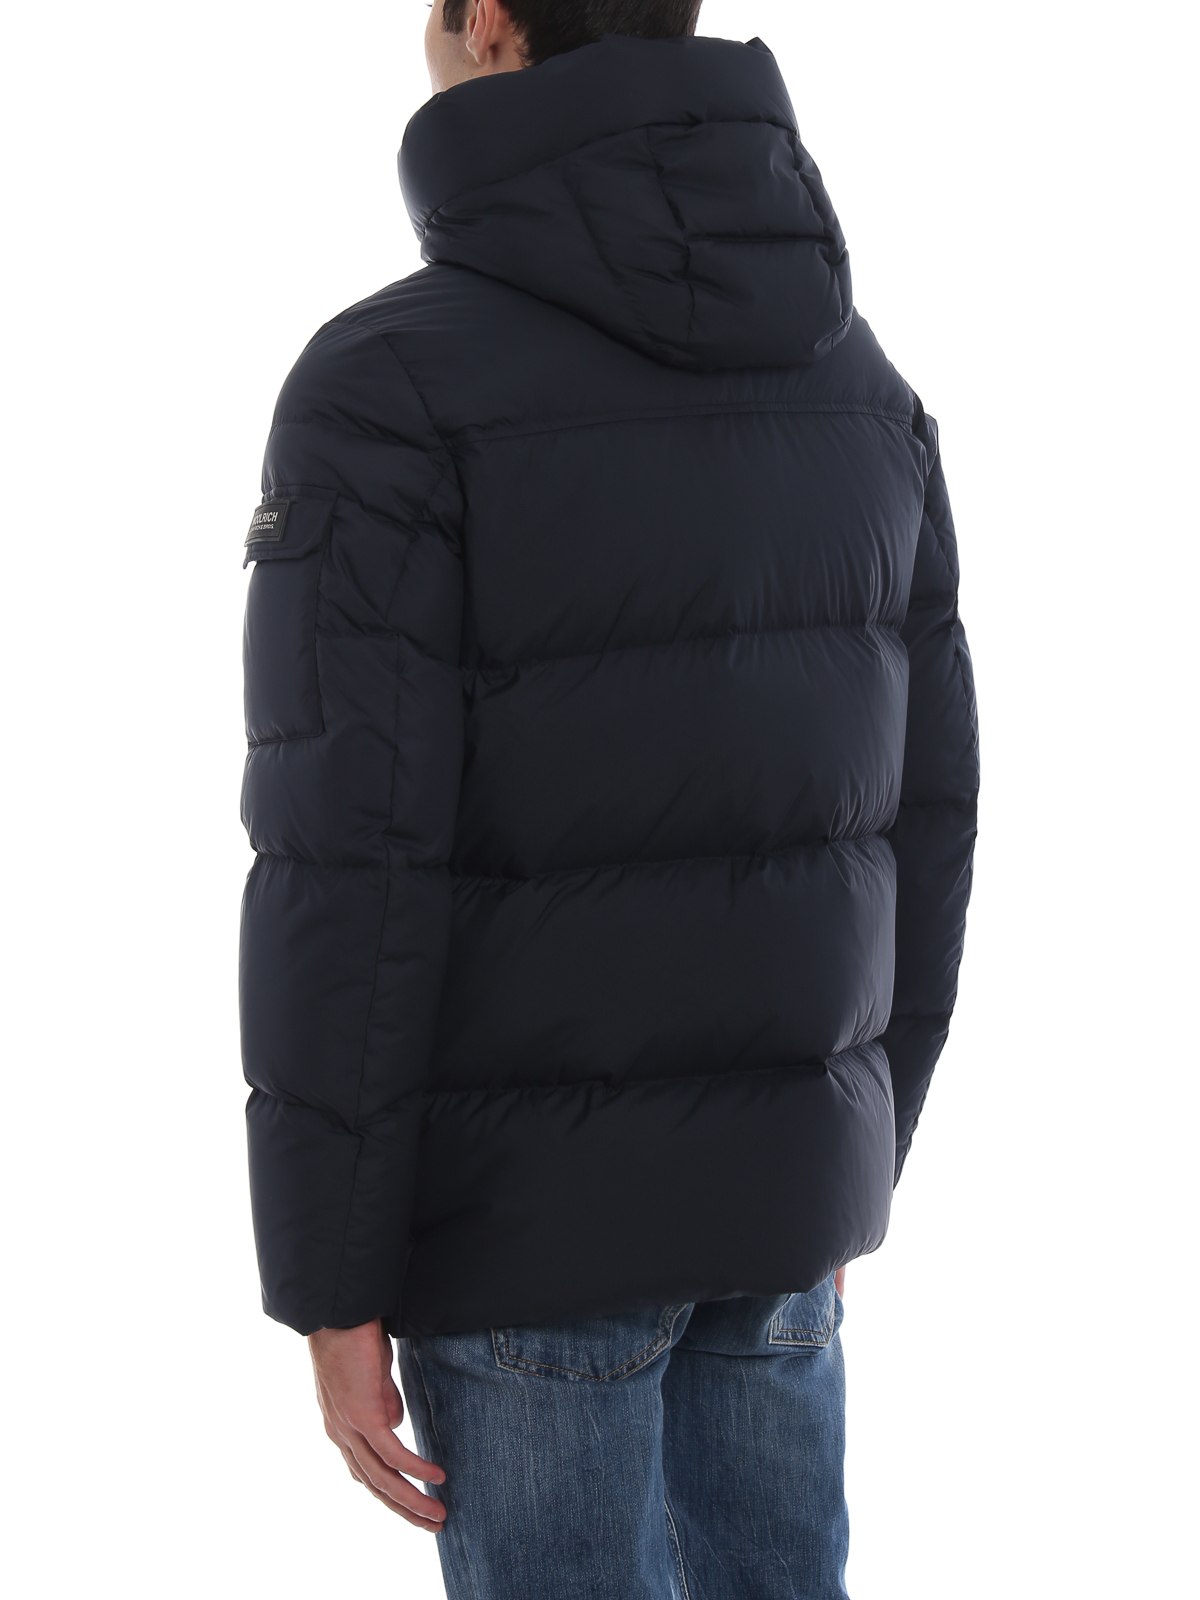 SUPREME JACKET, Men's Fashion, Coats, Jackets and Outerwear on